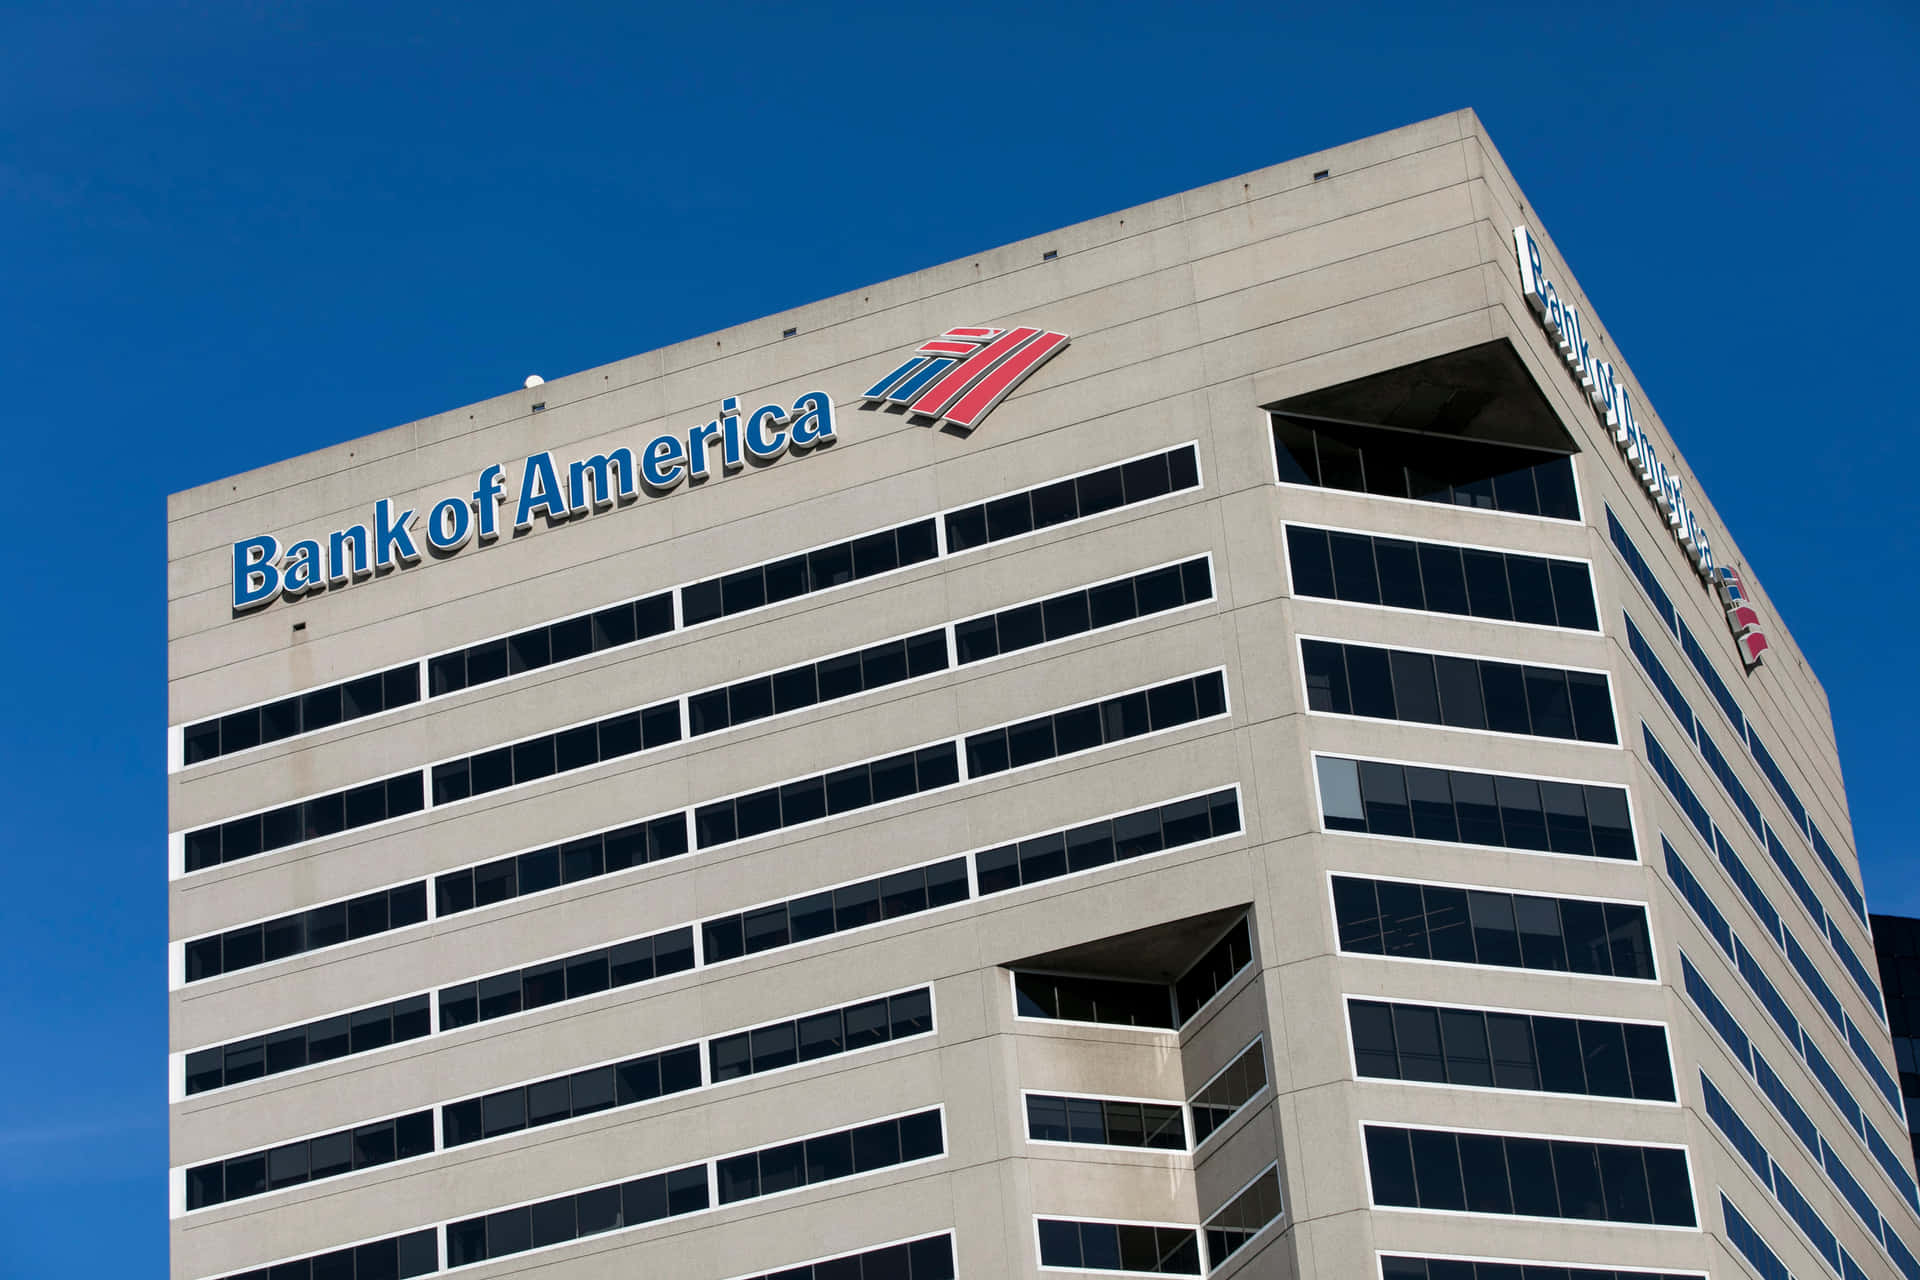 Bank Of America helps you to simplify your financial life.